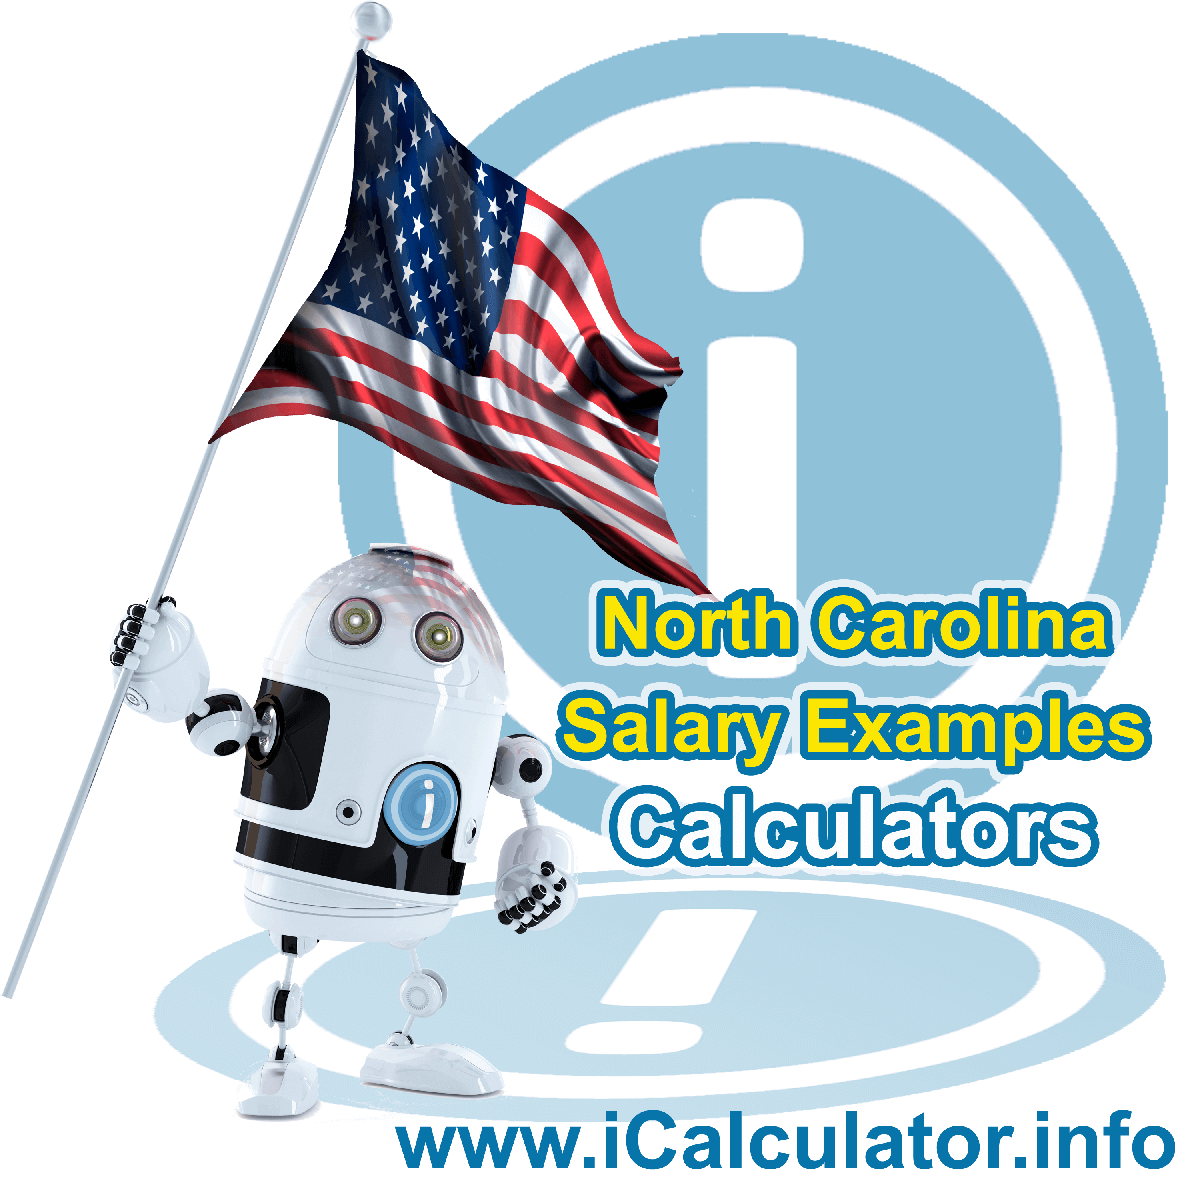 North Carolina Salary Example for $ 25,000.00 in 2023 | iCalculator™ | $ 25,000.00 salary example for employee and employer paying North Carolina State tincome taxes. Detailed salary after tax calculation including North Carolina State Tax, Federal State Tax, Medicare Deductions, Social Security, Capital Gains and other income tax and salary deductions complete with supporting North Carolina state tax tables 